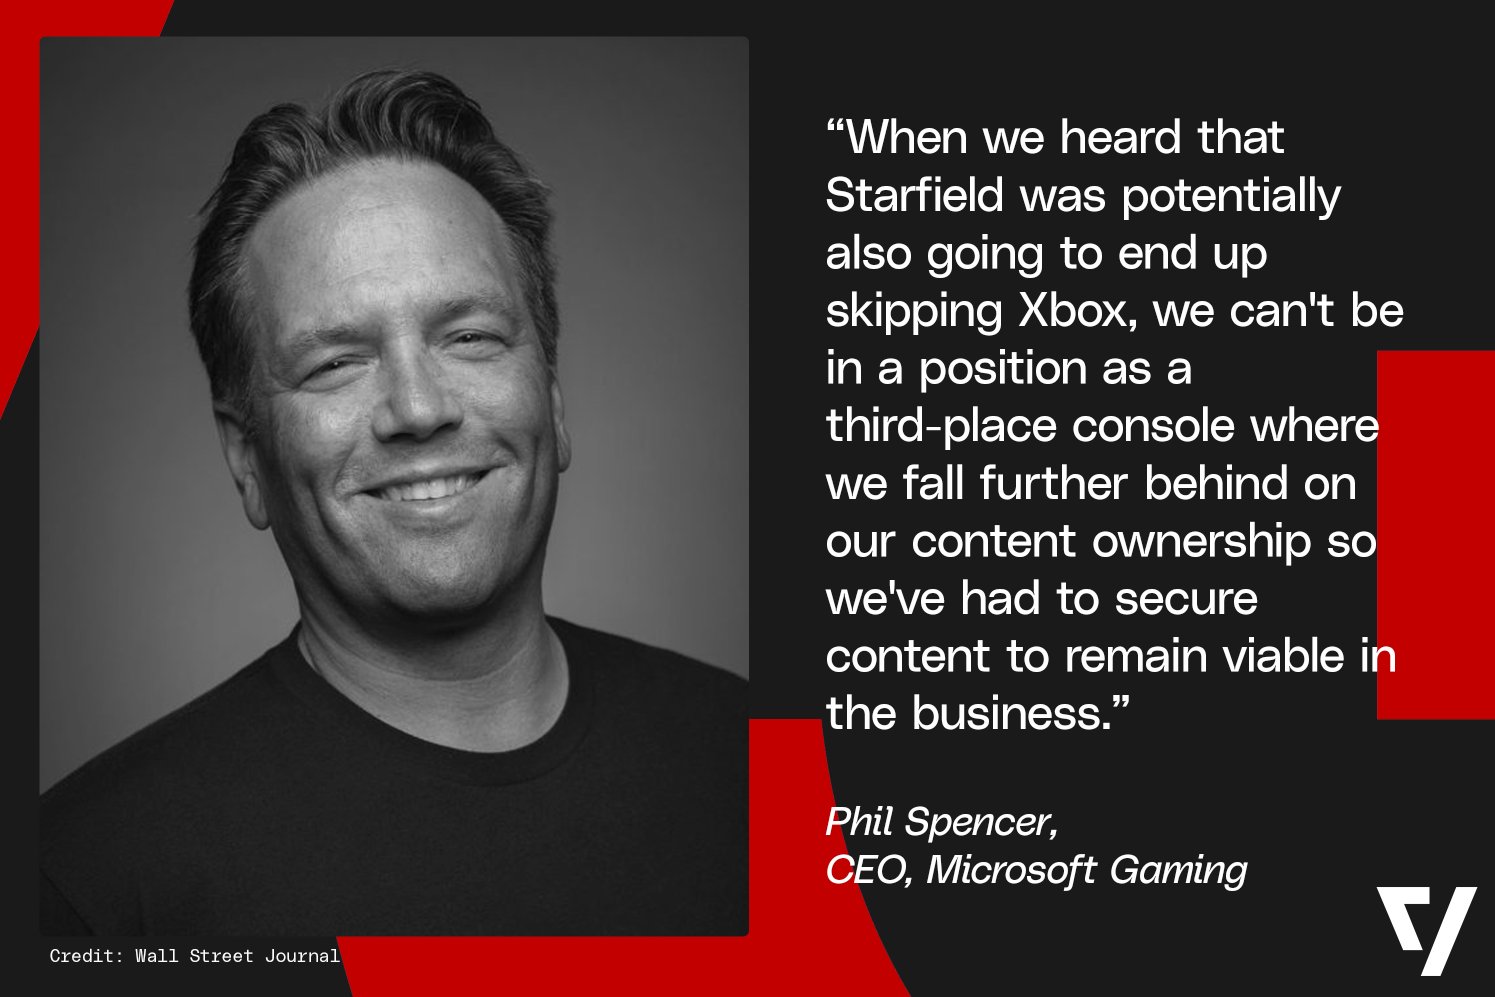 Starfield At 30FPS Is A Creative Decision, Says Xbox's Phil